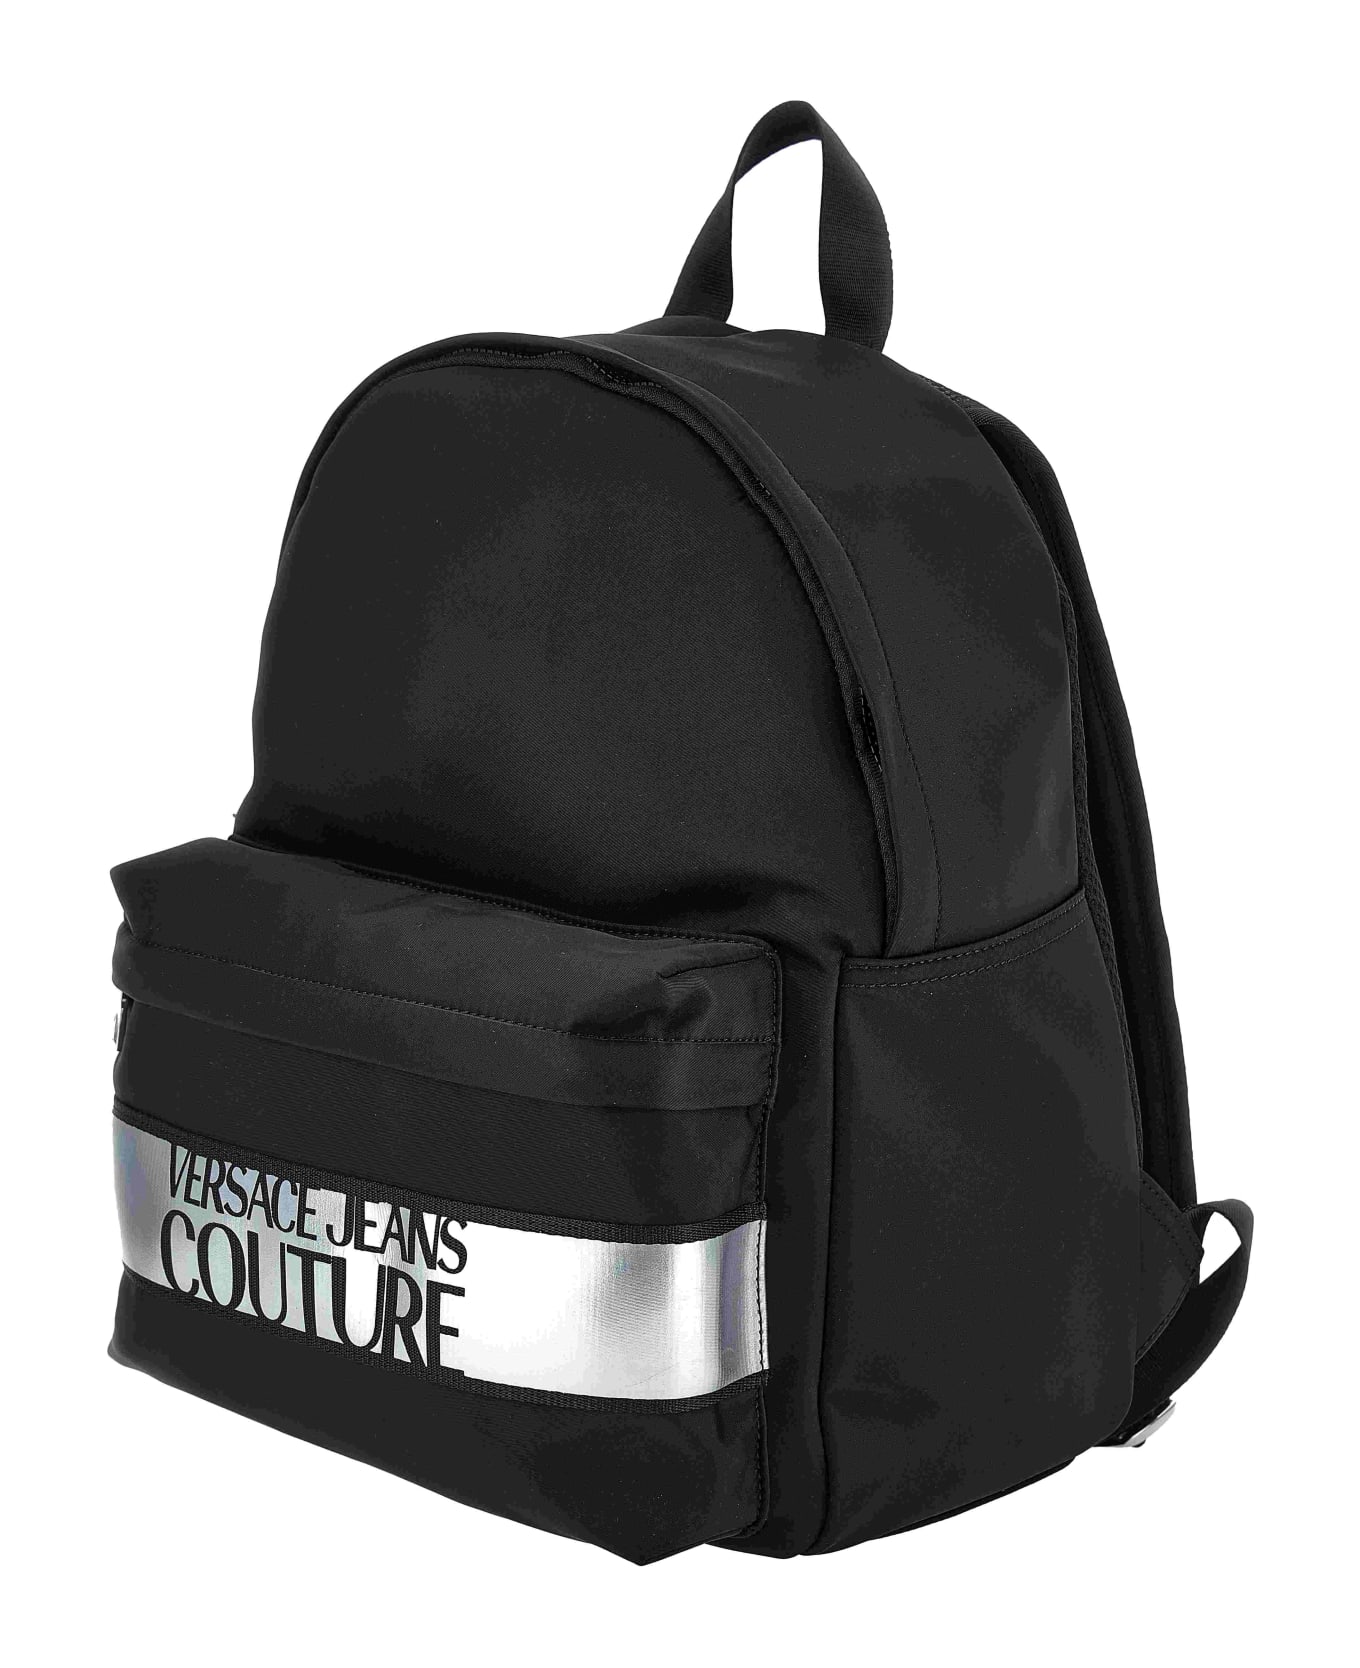 Versace Jeans Couture Range Iconic Logo Sketch 1 Backpack - BLACK/SILVER バックパック